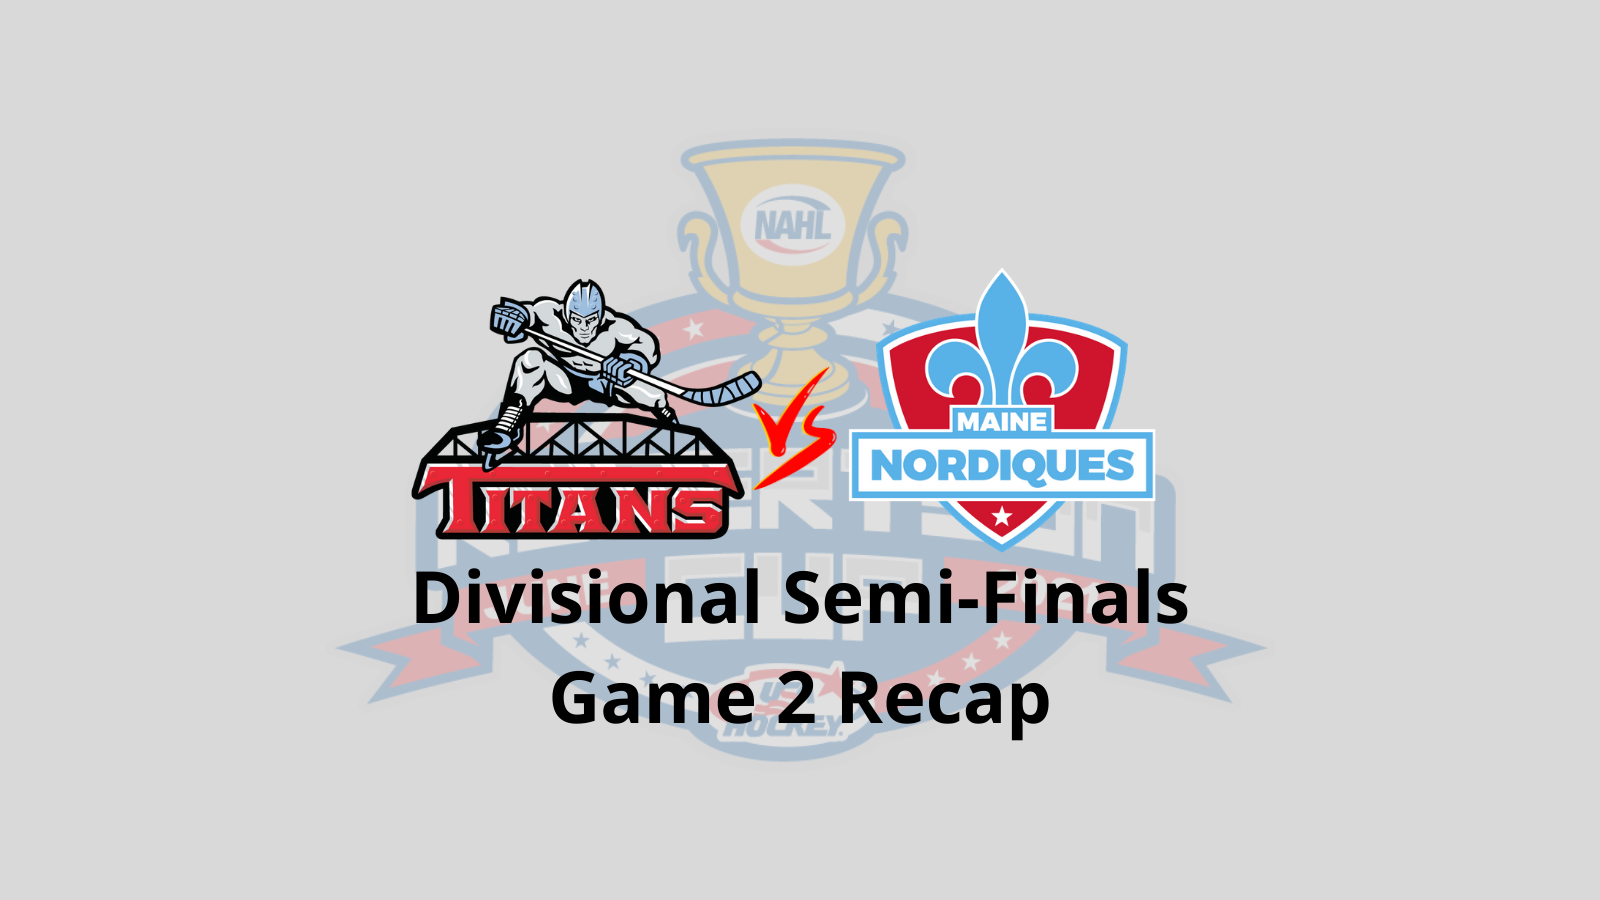 Series tied at one after two, first-period goals propel Titans to 4 – 1 win over Nordiques